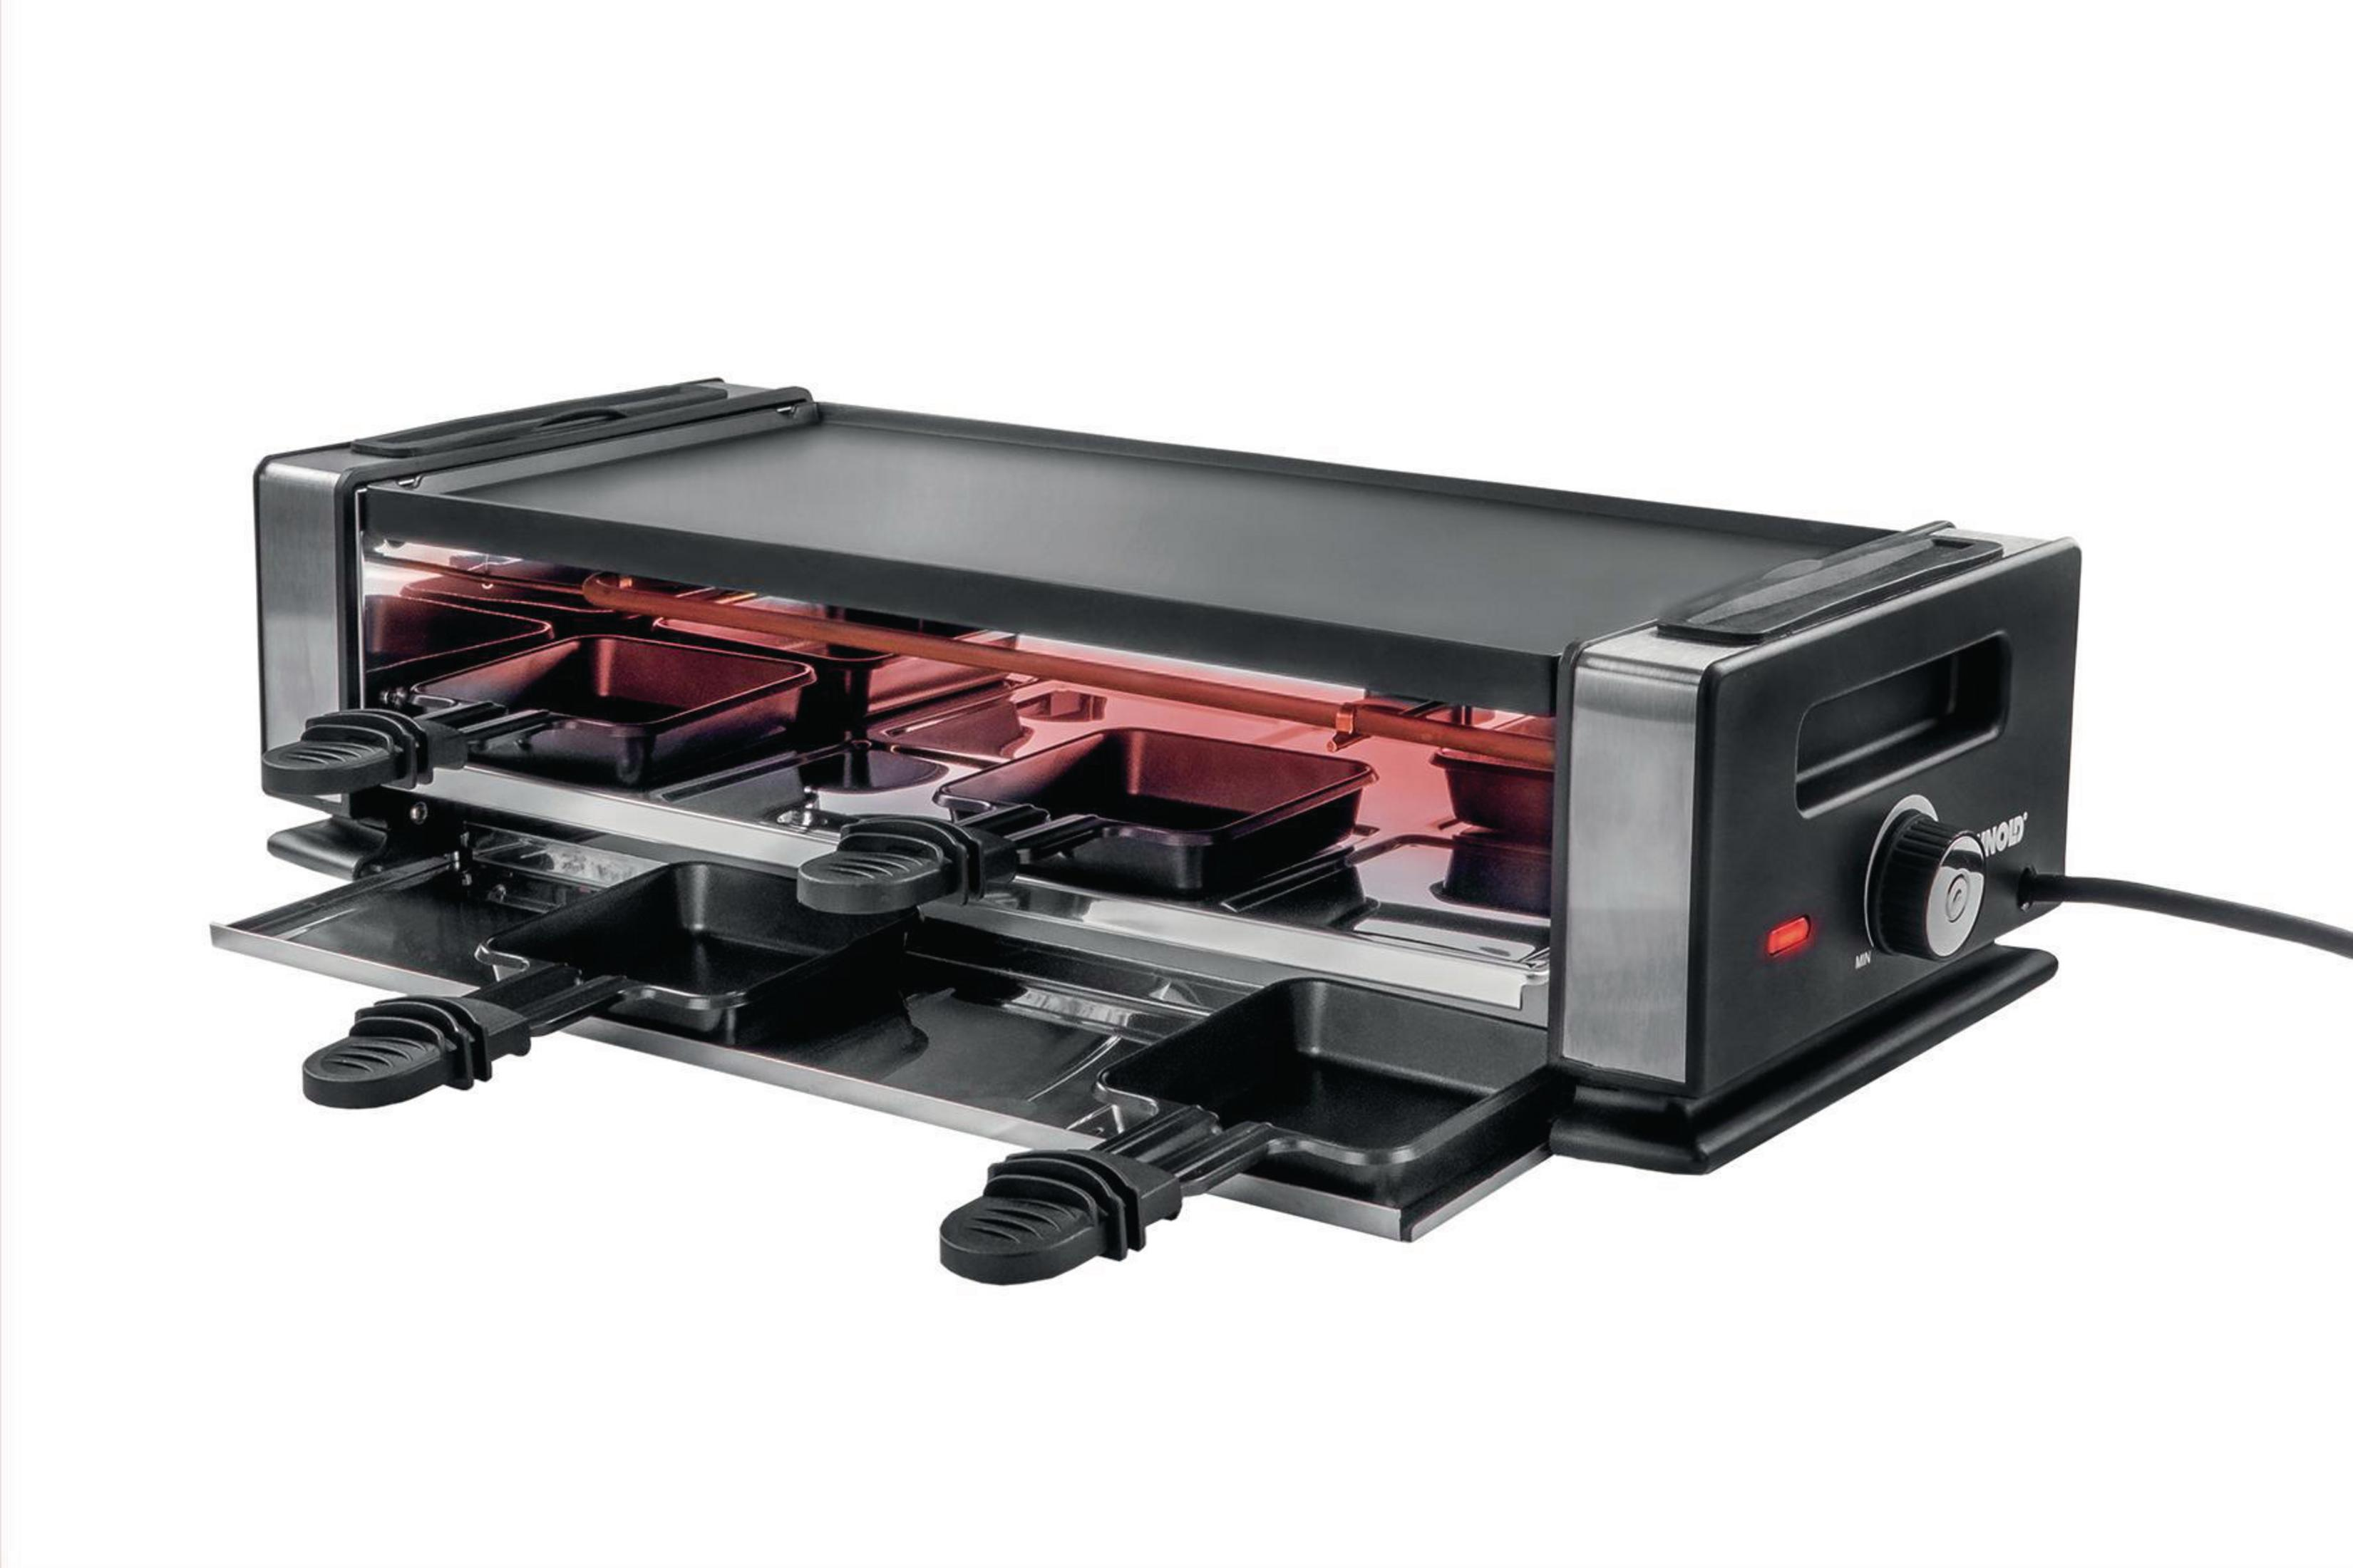 Raclette UNOLD DELICE 48760 BASIC